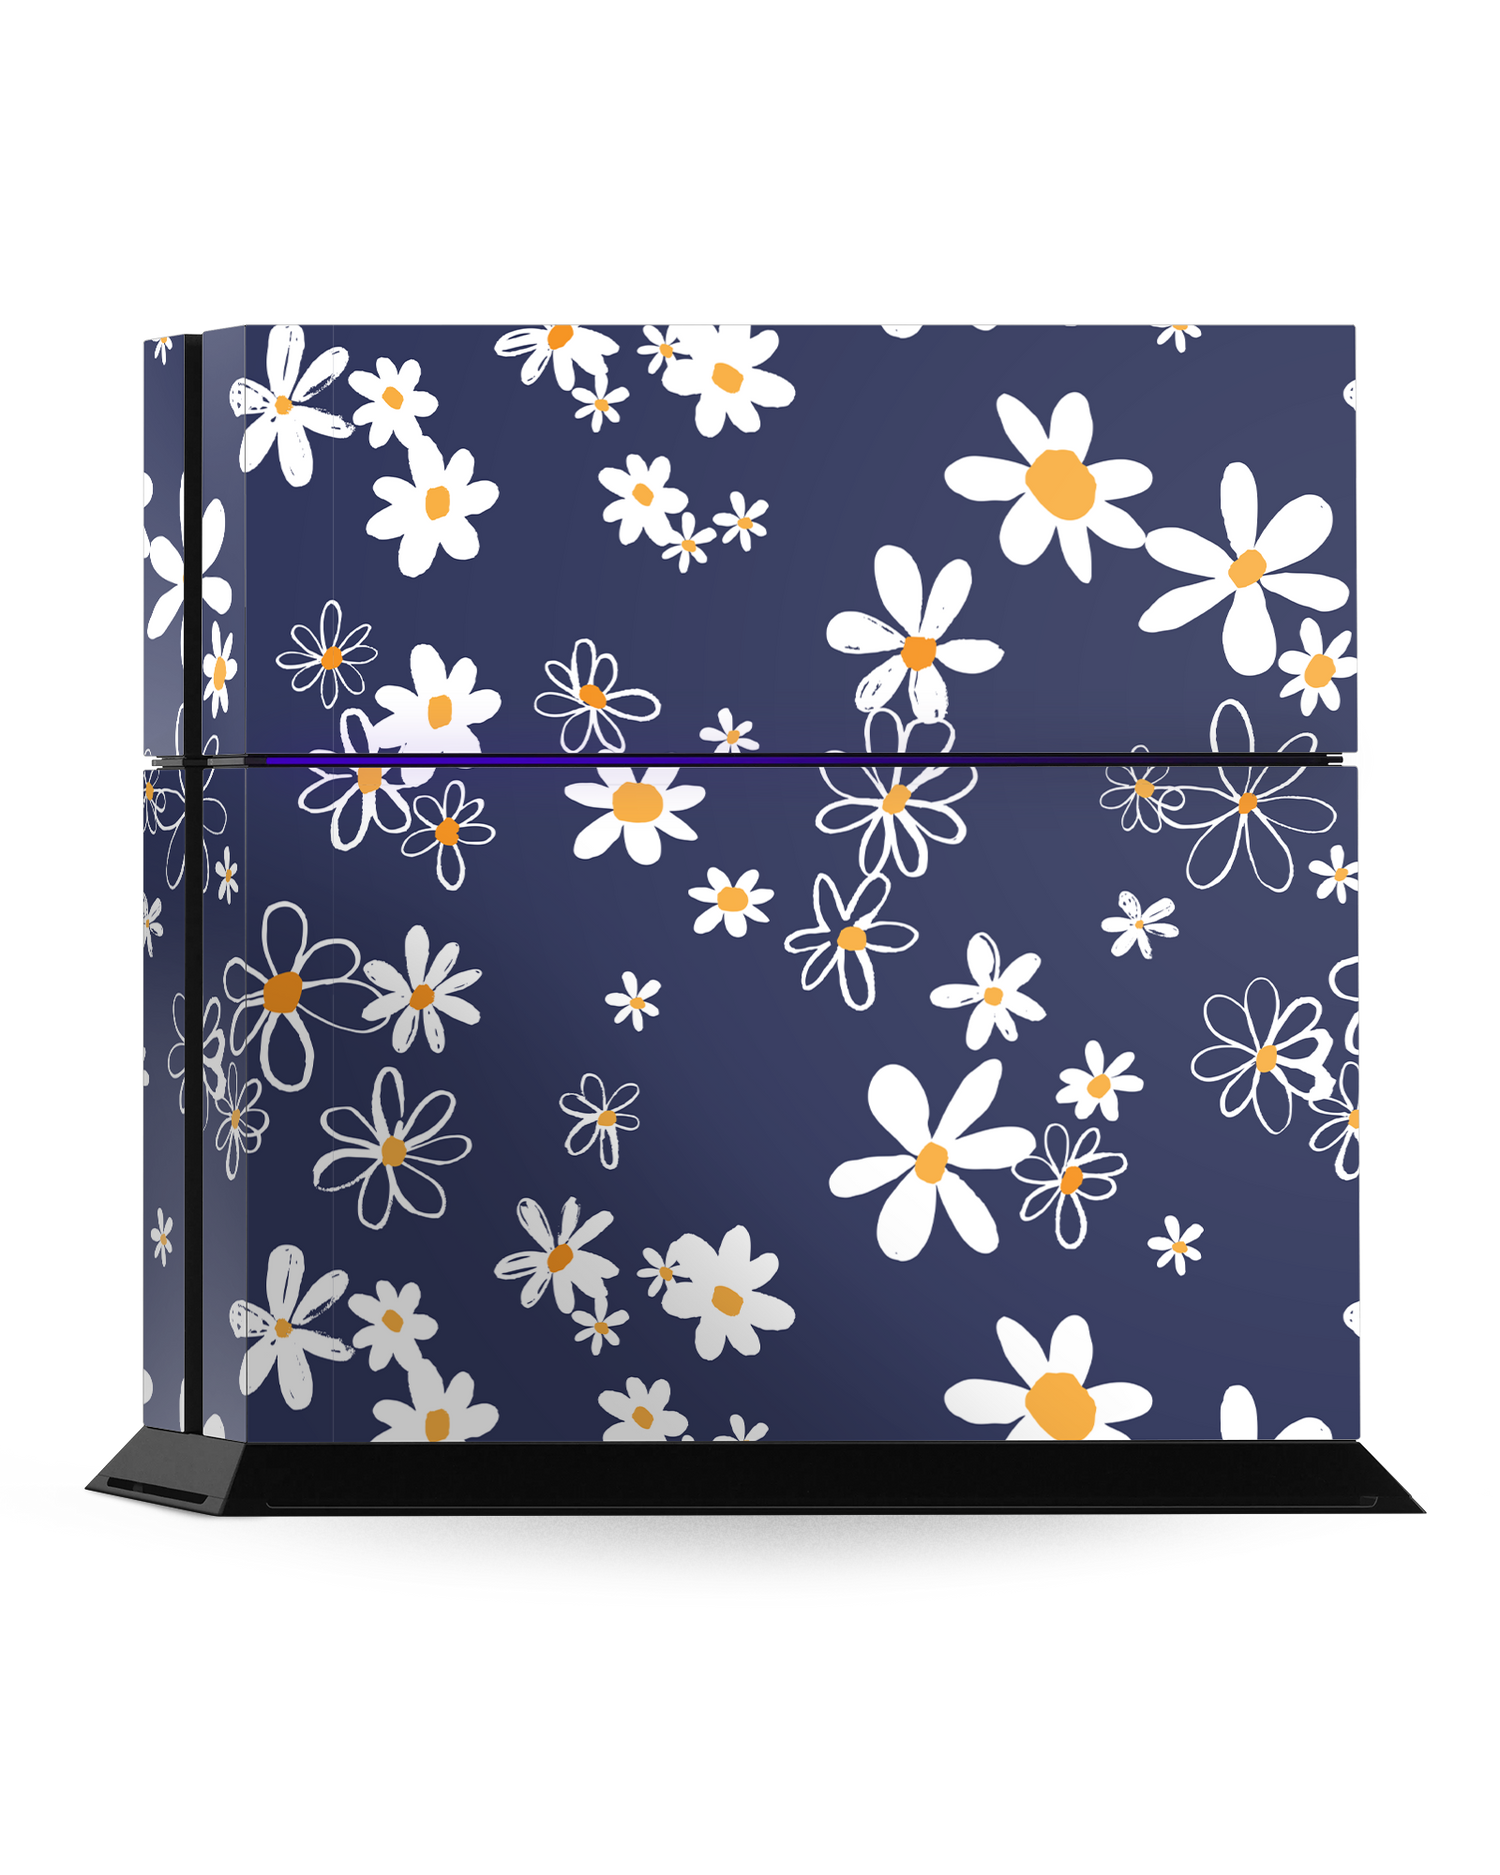 Navy Daisies Console Skin for Sony PlayStation 4: Standing